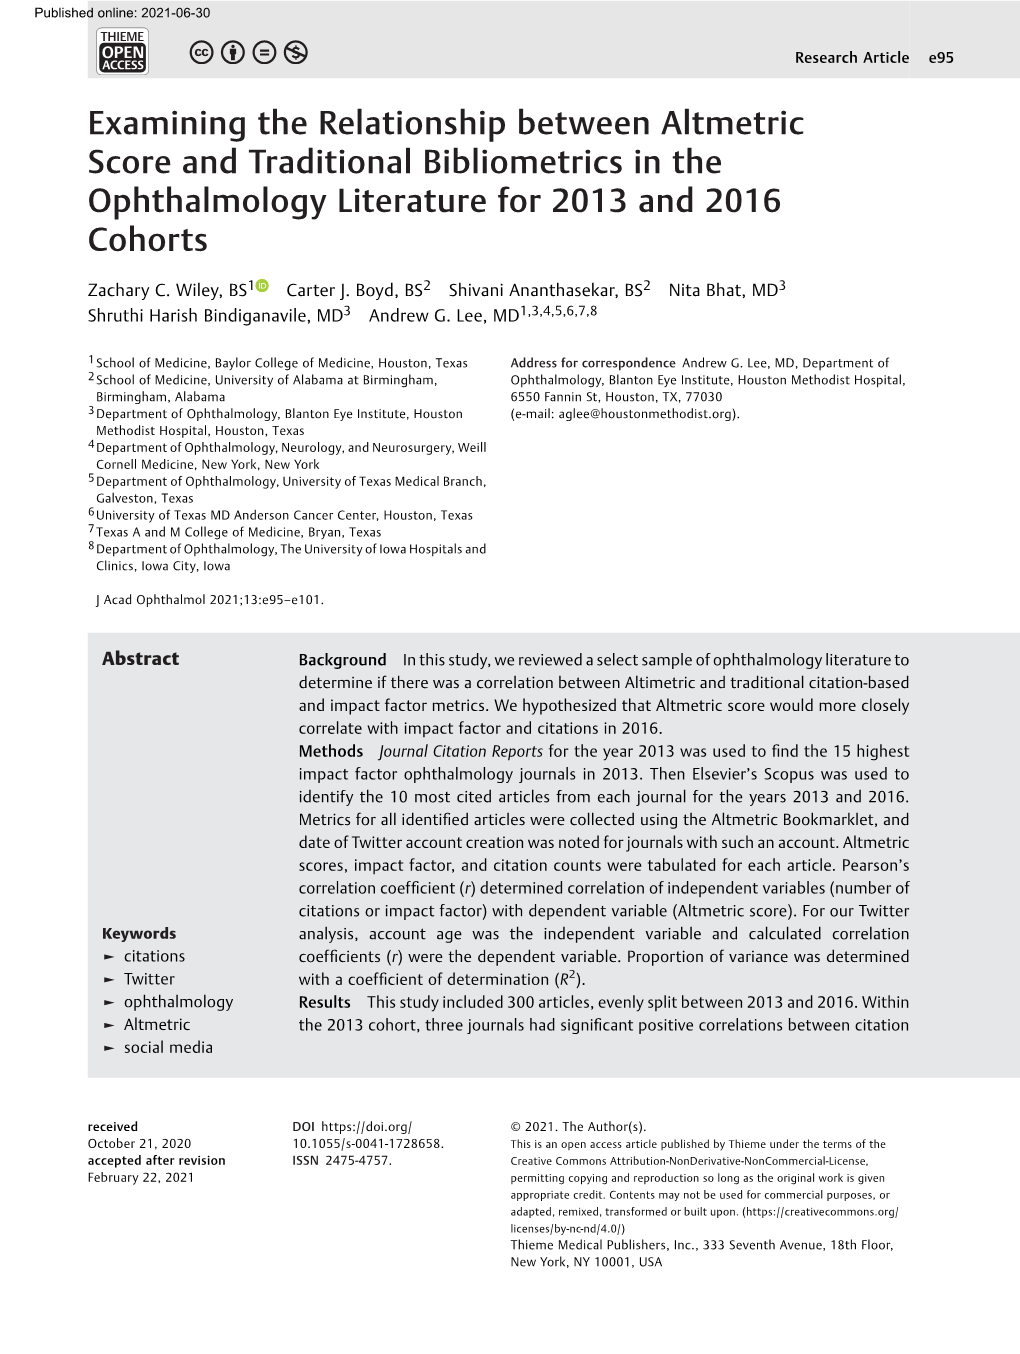 Examining the Relationship Between Altmetric Score and Traditional Bibliometrics in the Ophthalmology Literature for 2013 and 2016 Cohorts